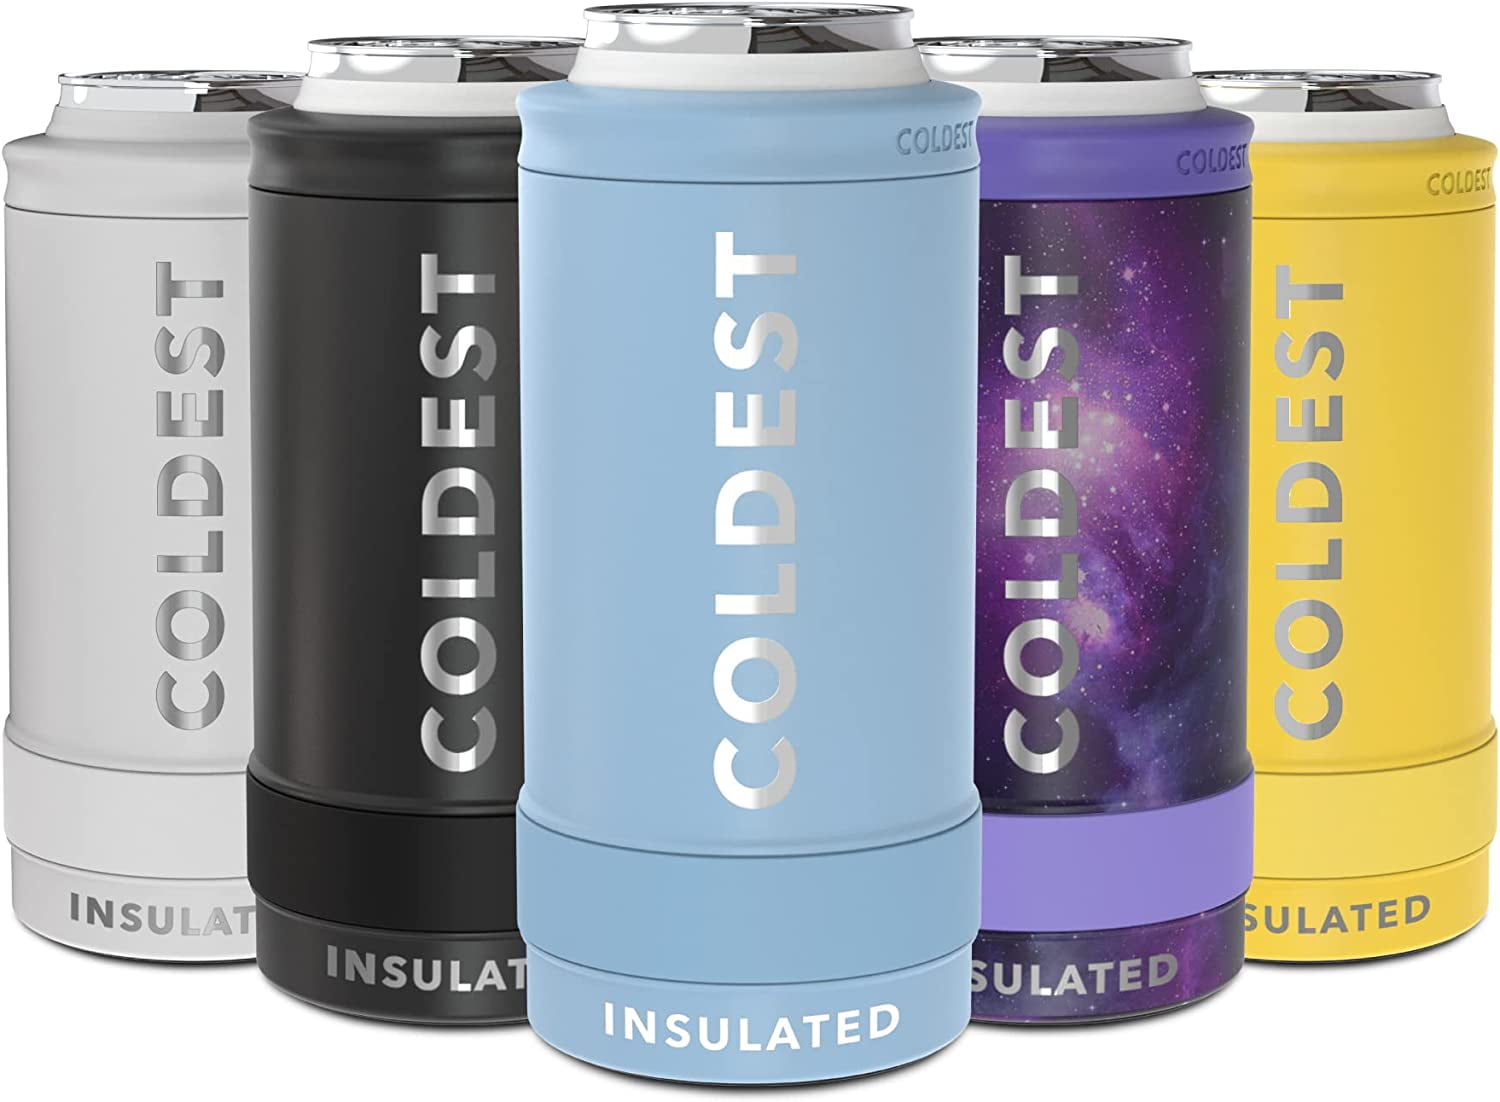 Cool Gear 4-Pack 25 oz Tauton Insulated Stainless Steel Chillers with